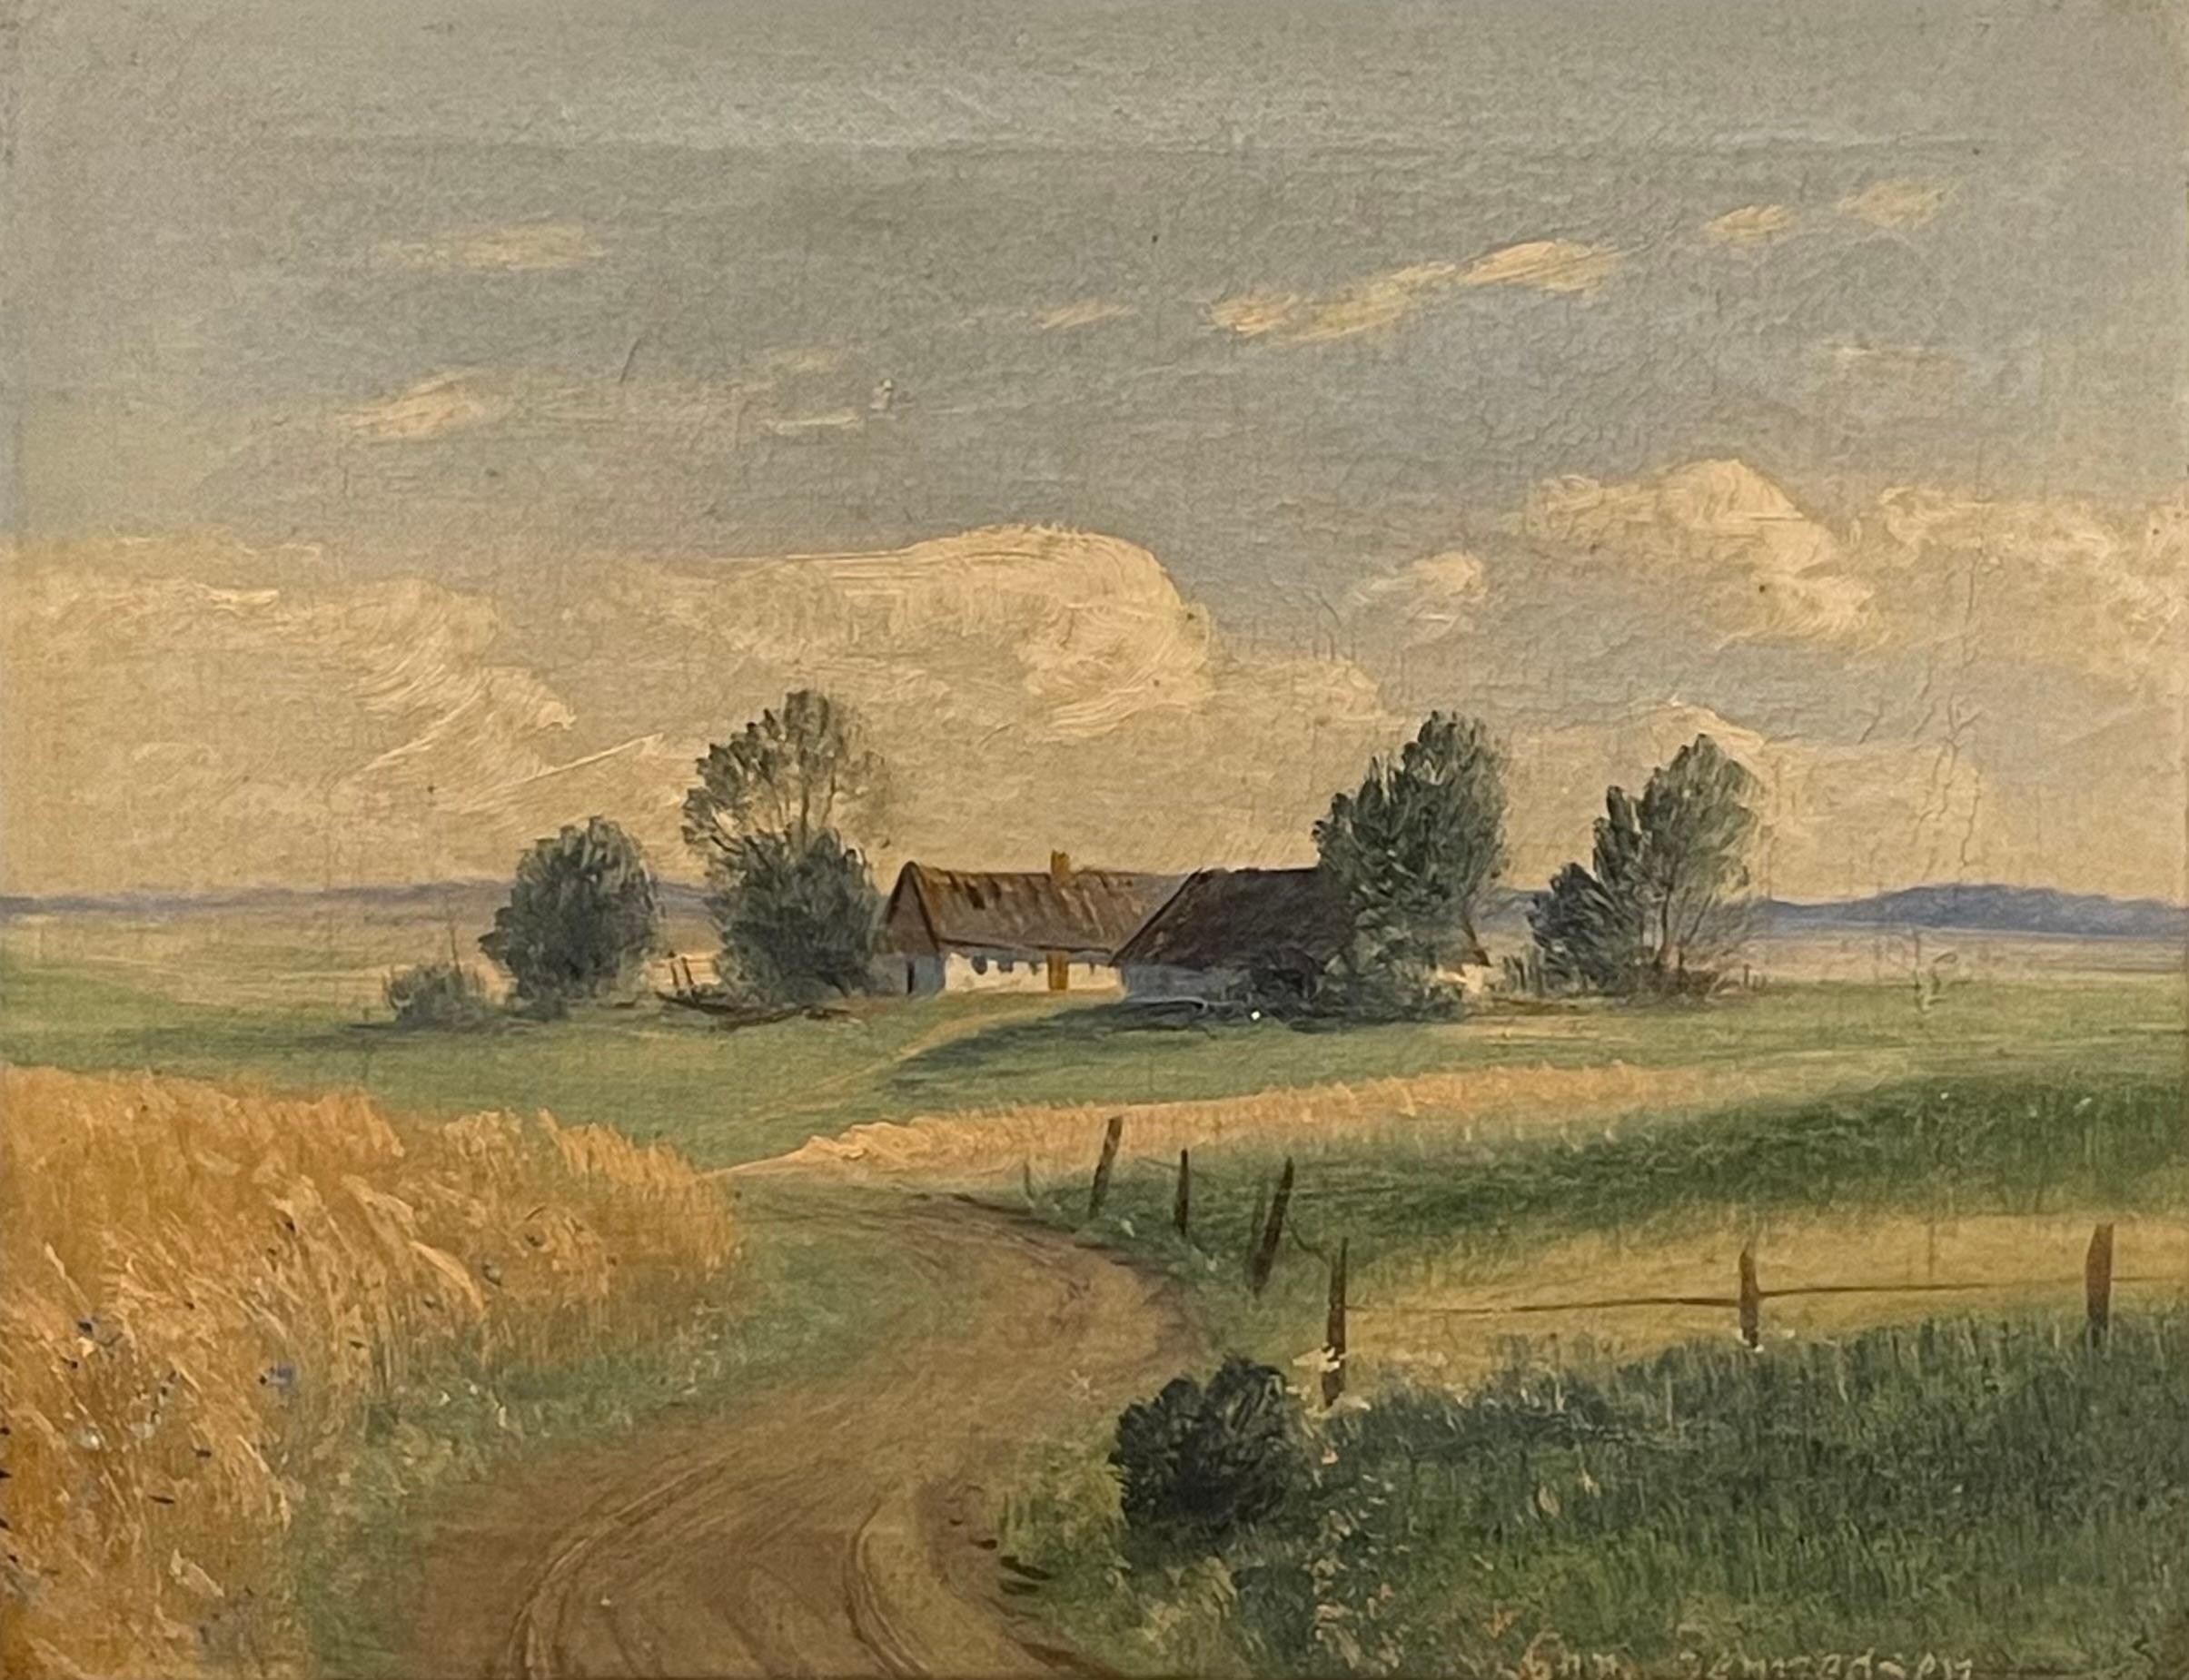 This is an exclusive Danish vintage original oil on canvas painting by Jens Christian Bennedsen (1883-1967) estimated to be from the 1930s.
It is framed in a gold painted wooden frame and have a landscape motive with a farm.

The painting is in good